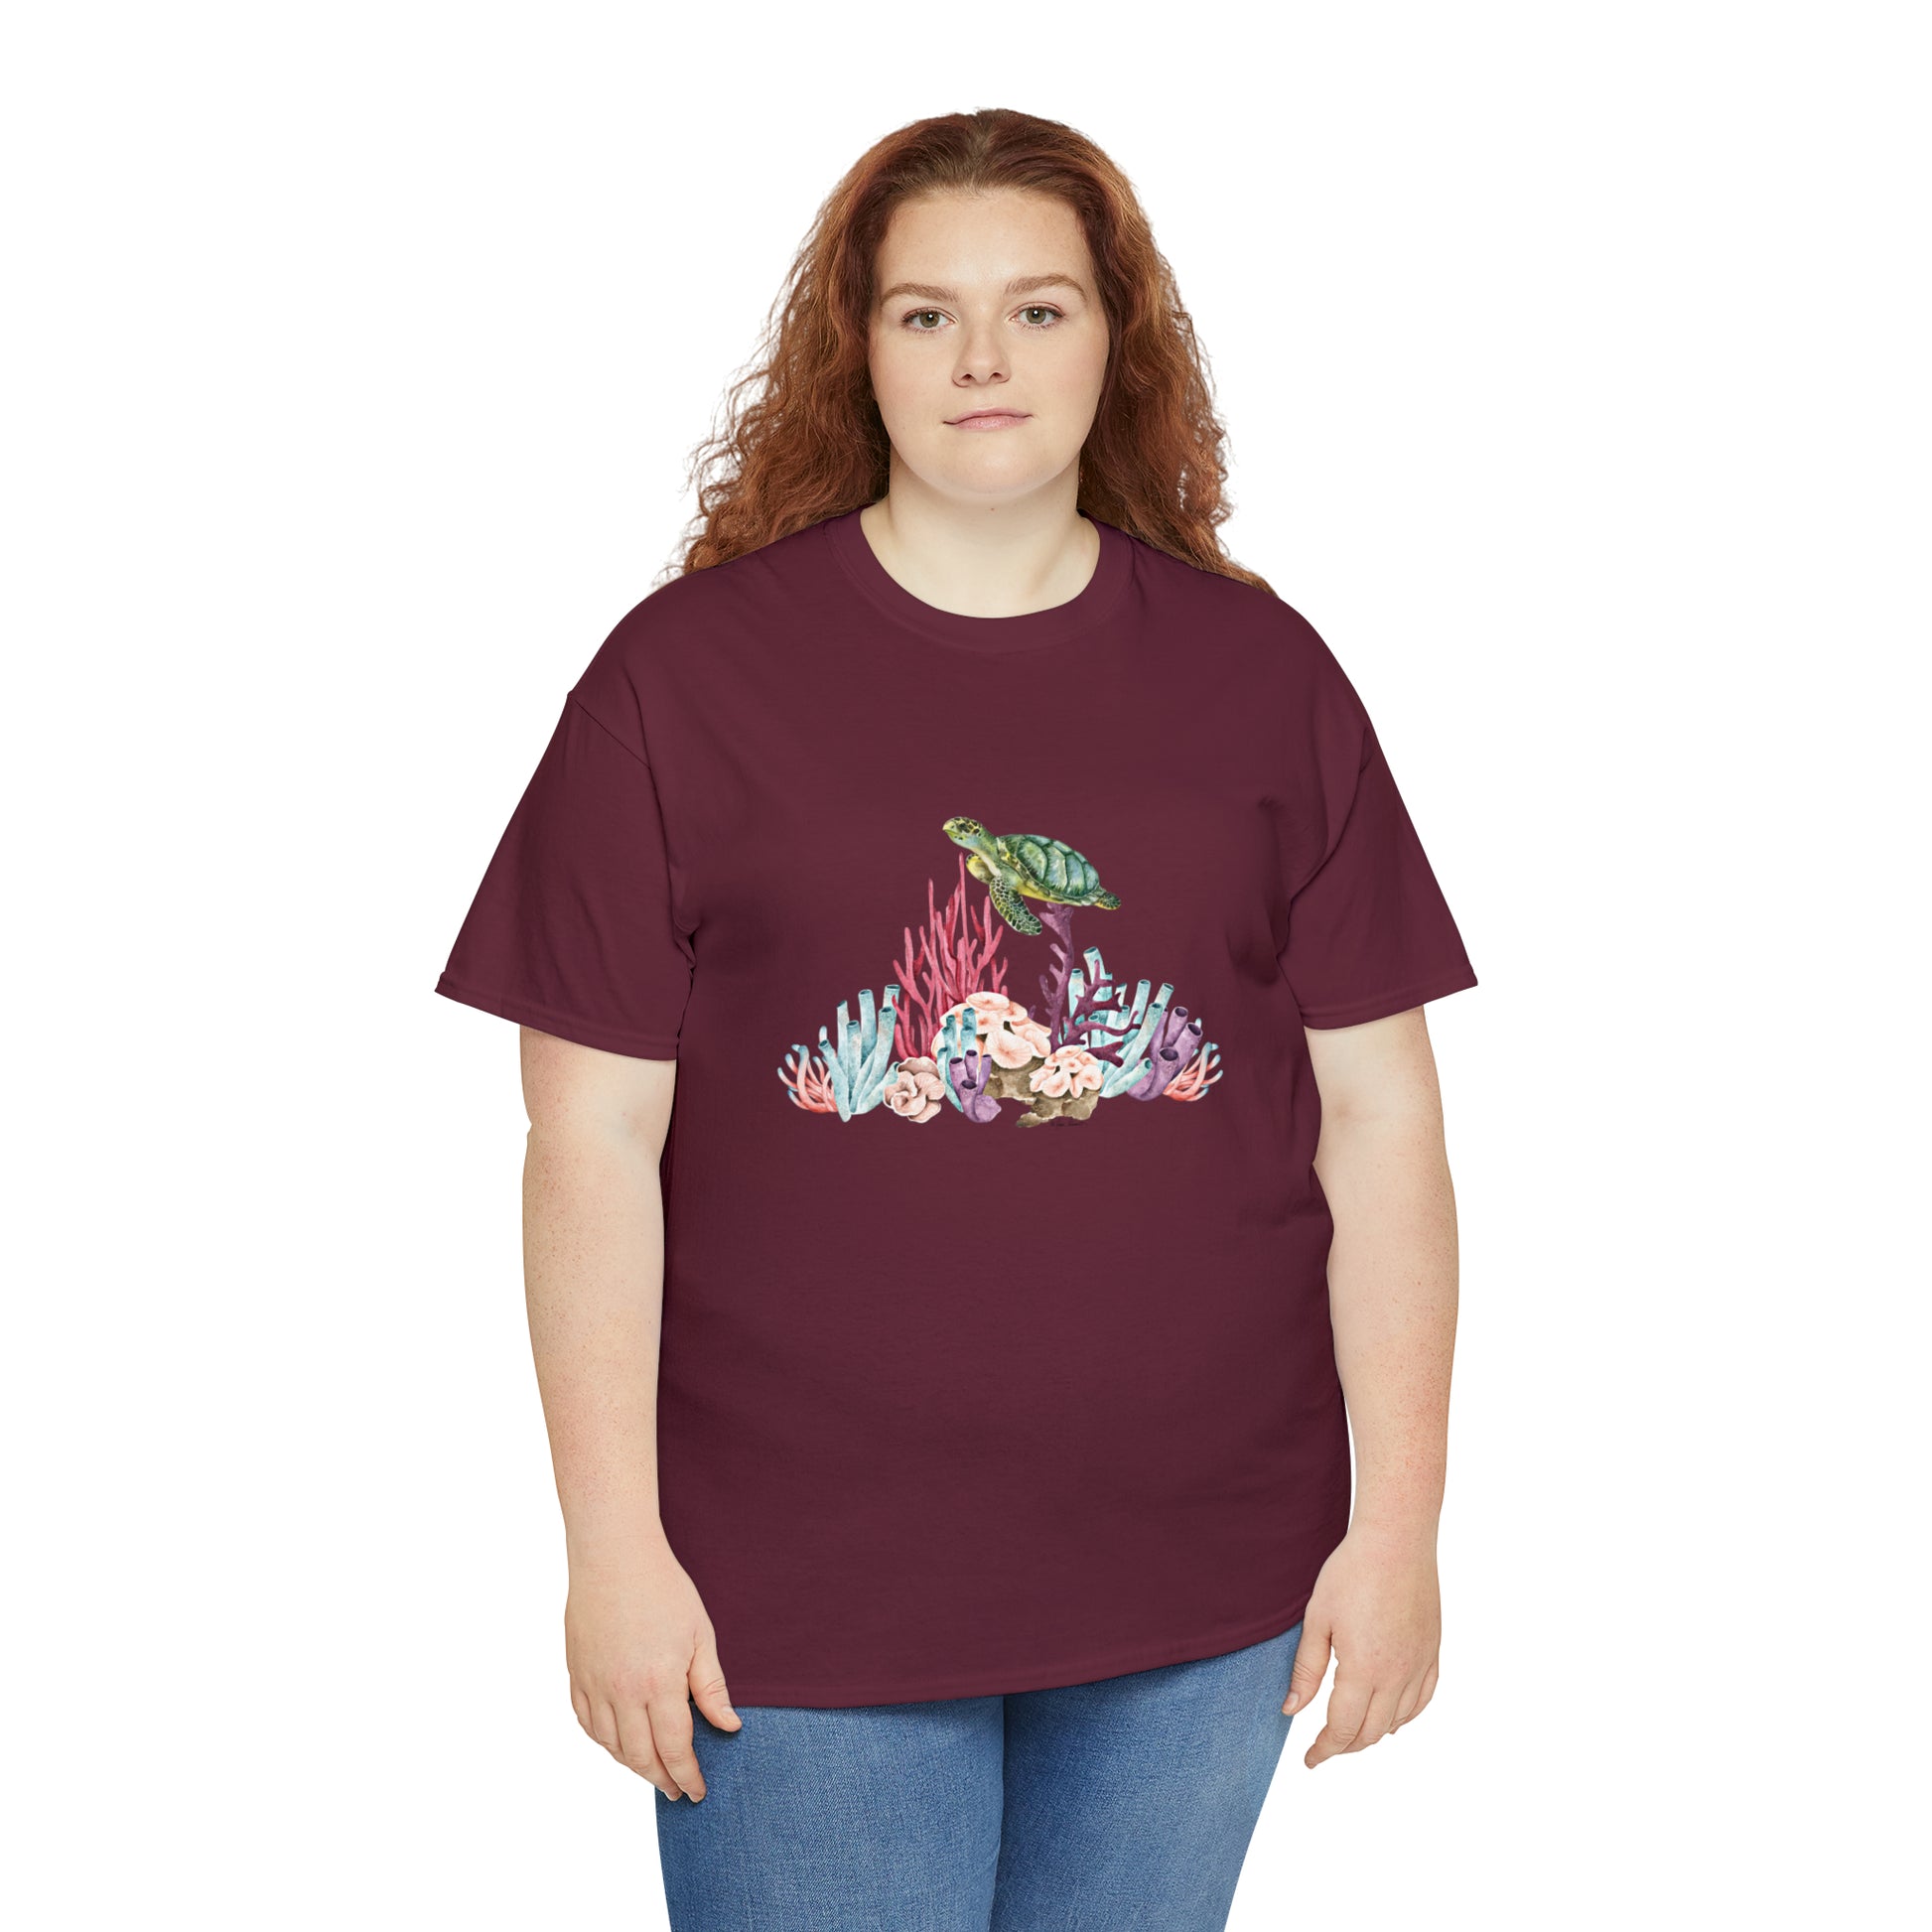 Mock up of a plus-size woman with red hair wearing the Maroon shirt